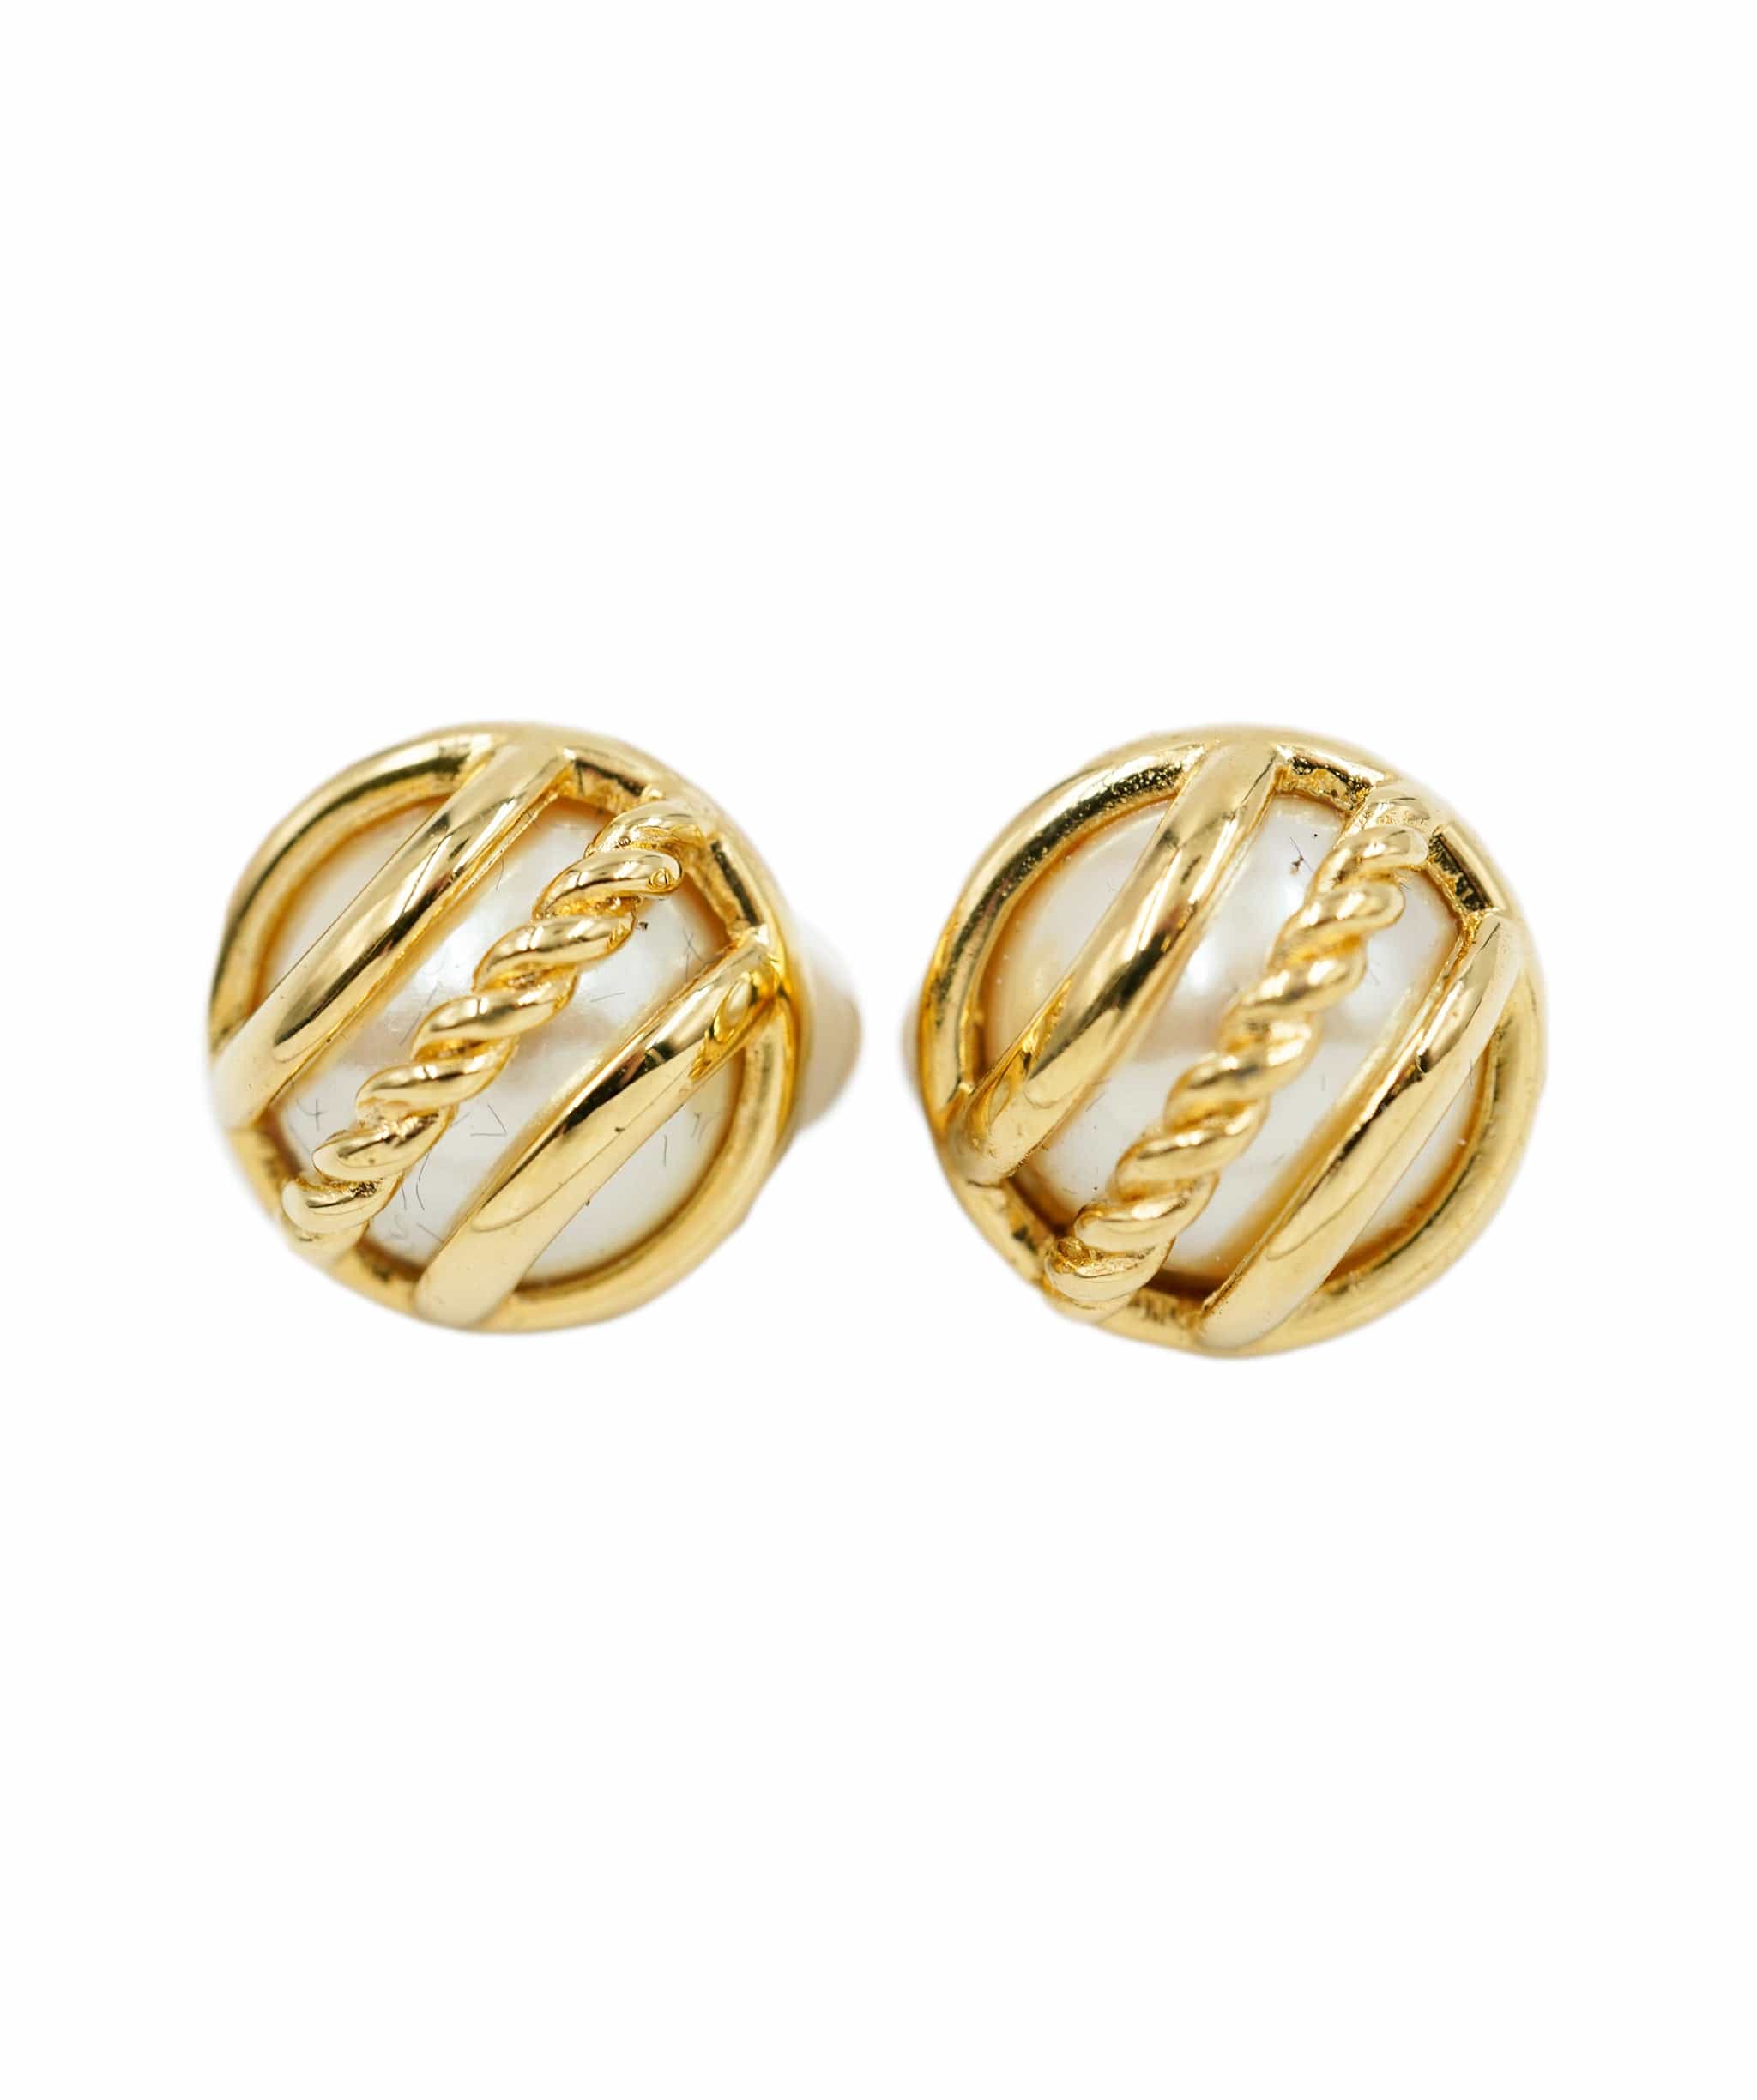 Givenchy Givenchy round faux white and gold clips, with tag AEL1100